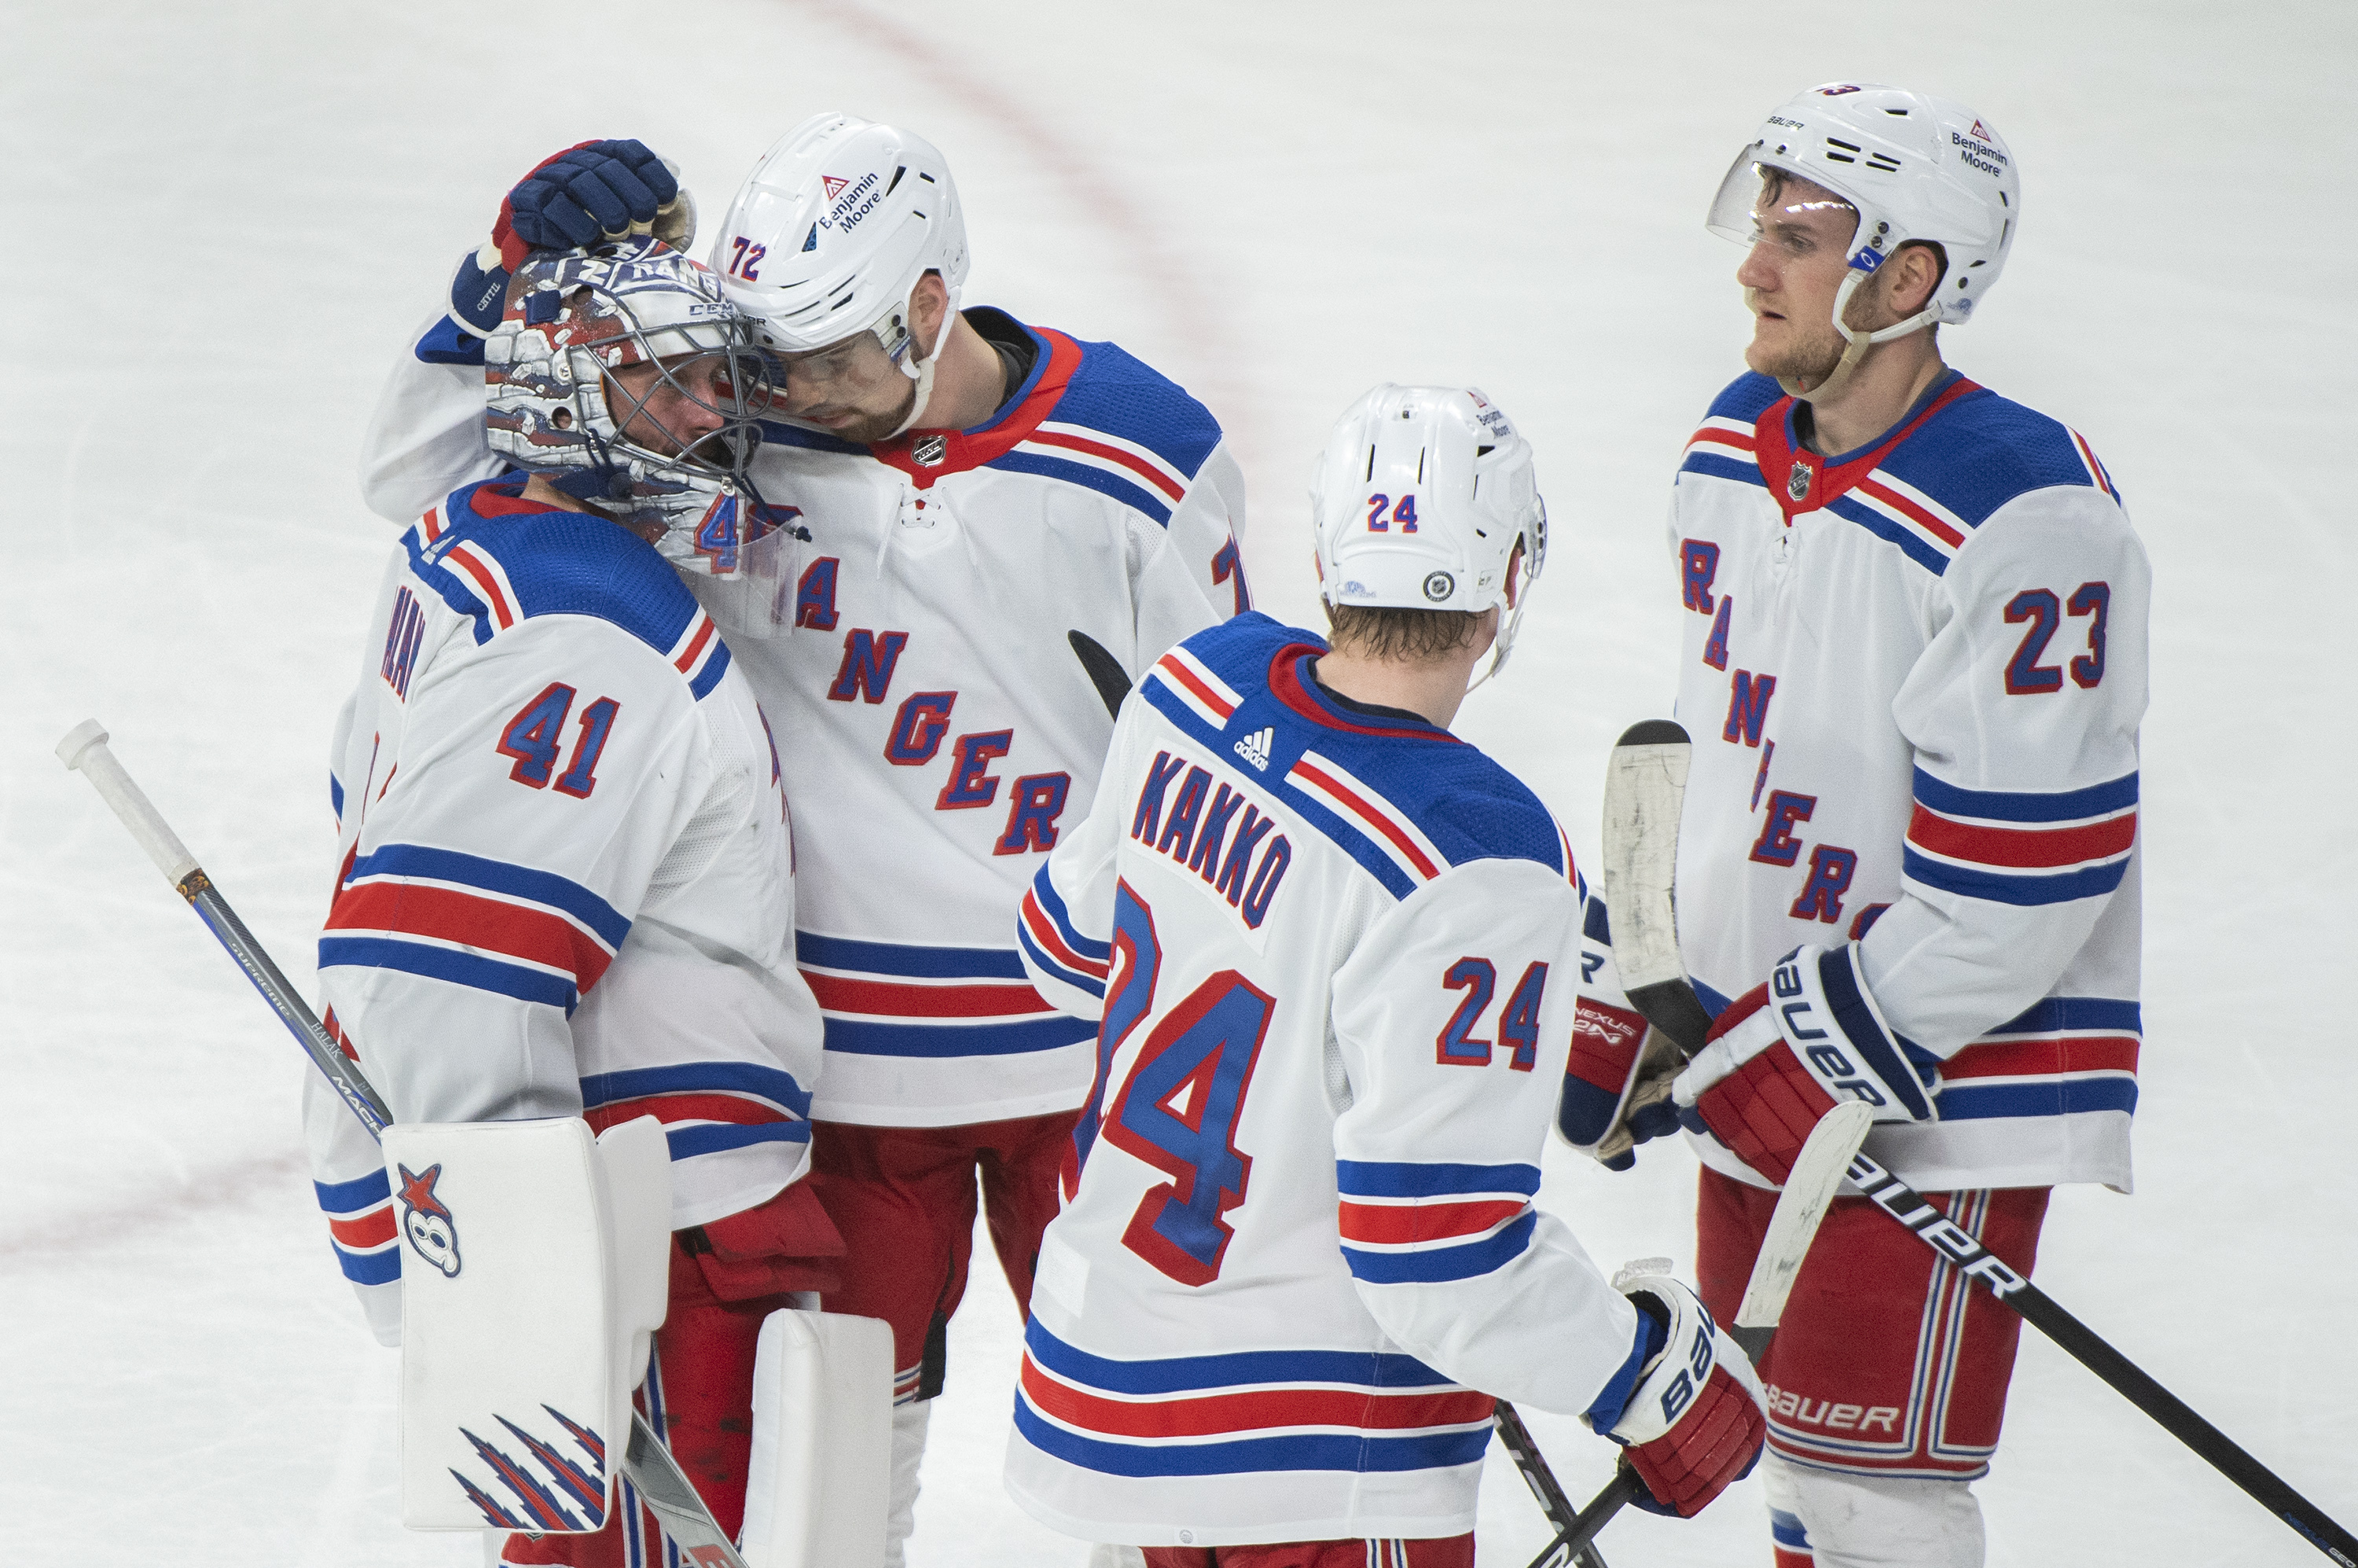 New Jersey Devils knock off New York Rangers with 3-2 OT win 